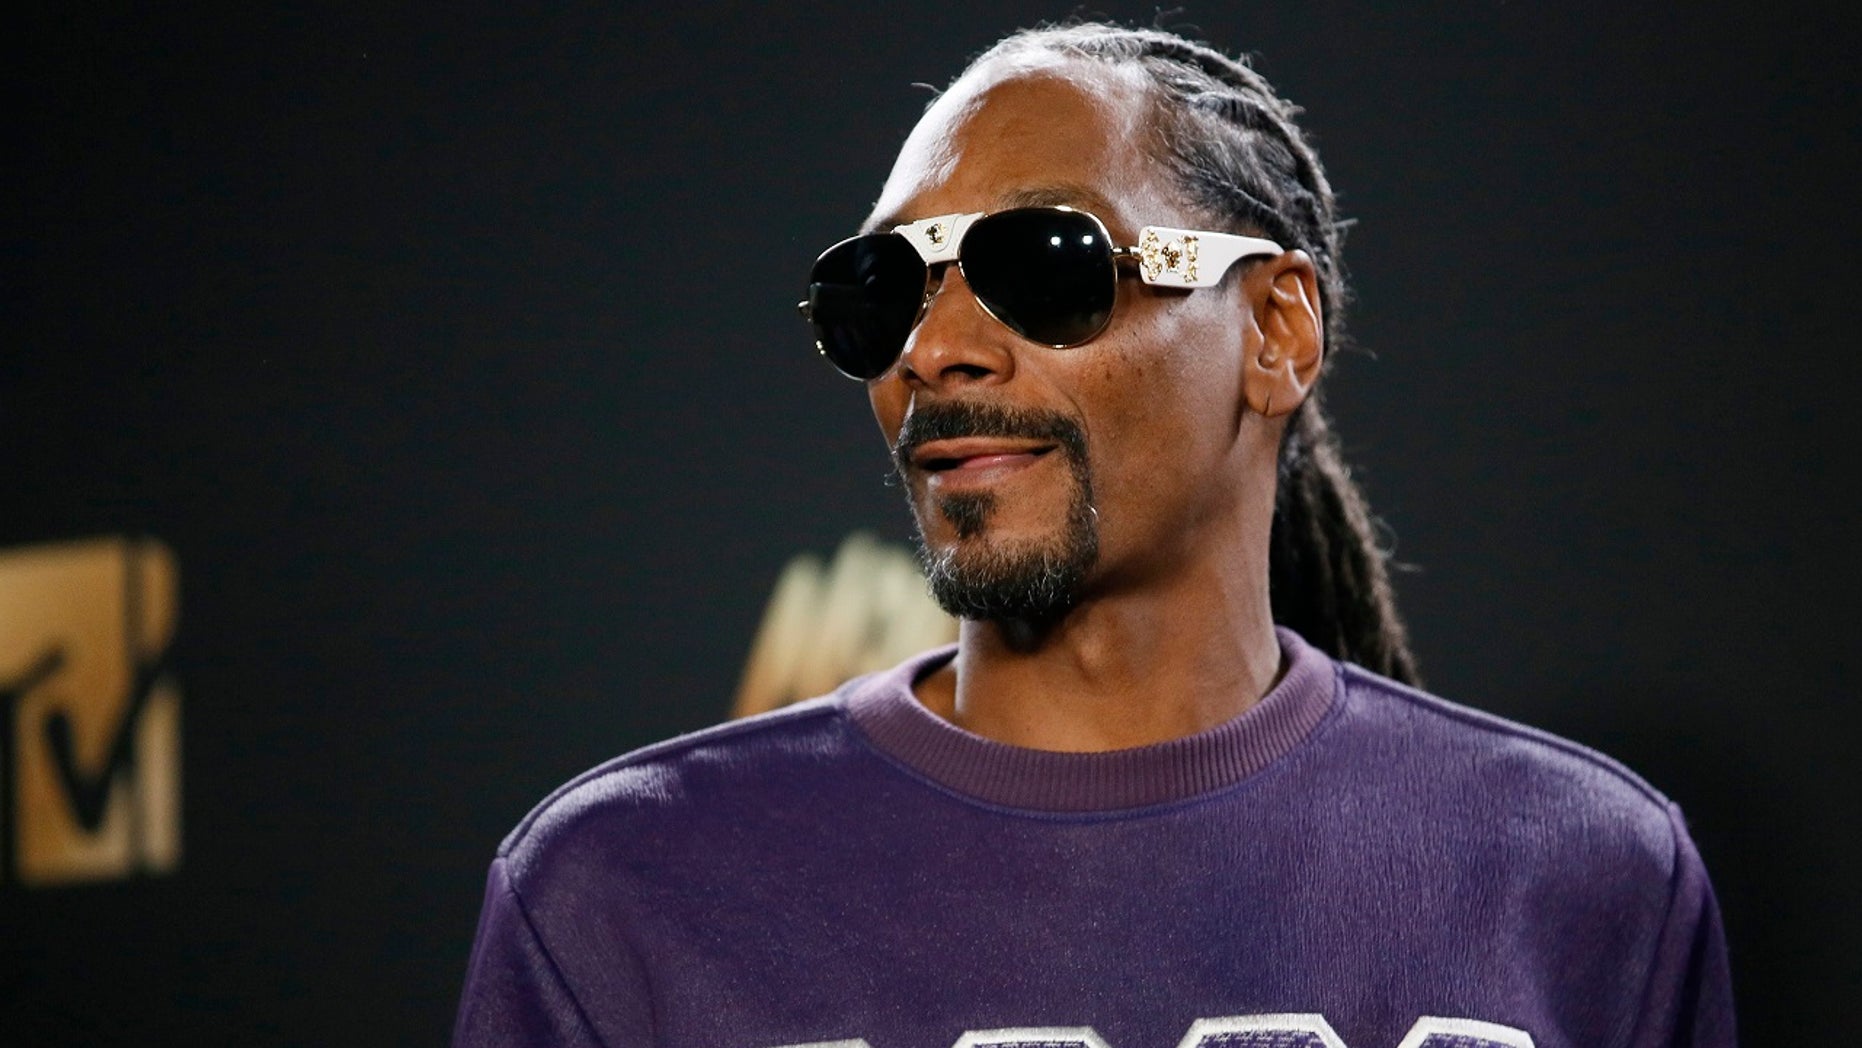 Snoop Dogg seeks to help rehome dog that was abandoned just before Christmas